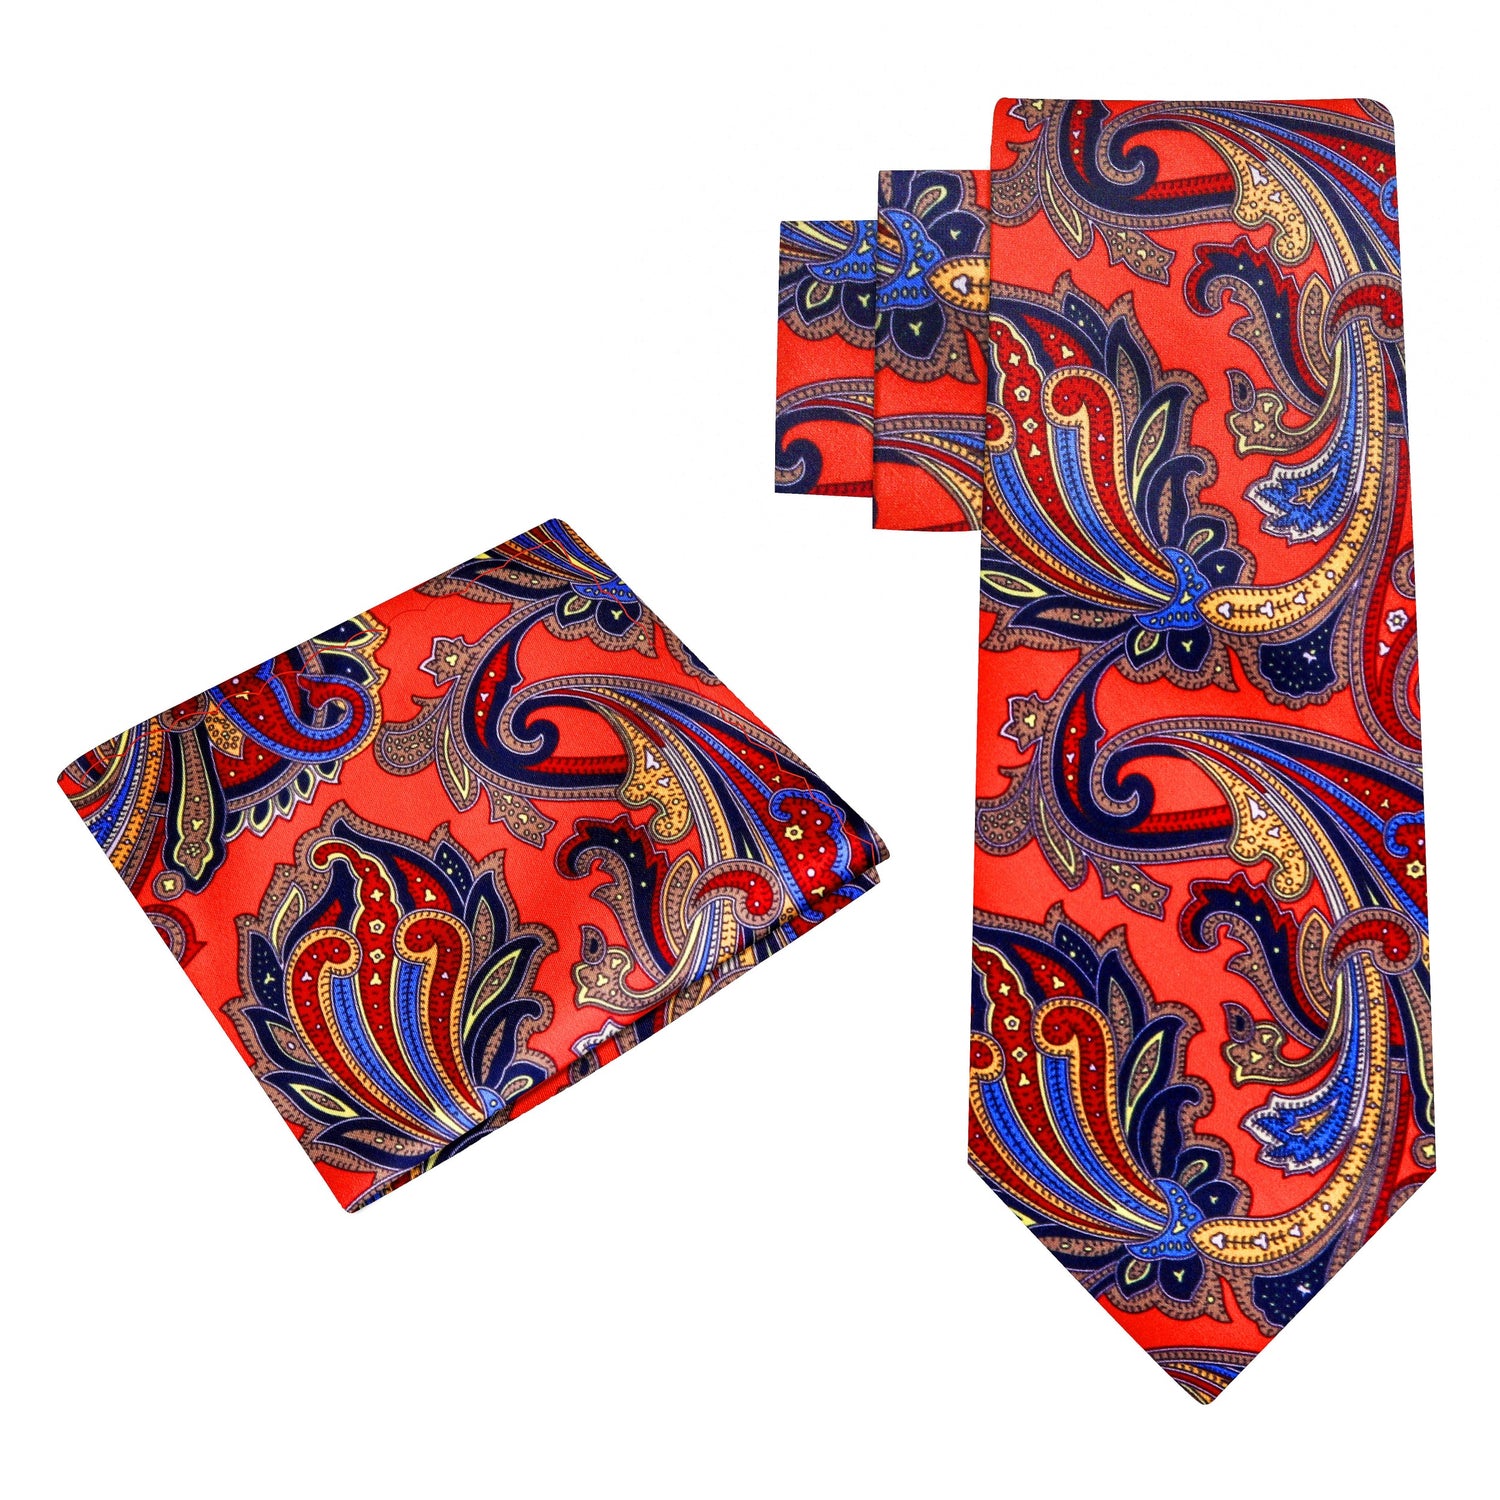 Alt View: A Red, Blue, Yellow Floral Pattern Silk Necktie, Matching Pocket Square